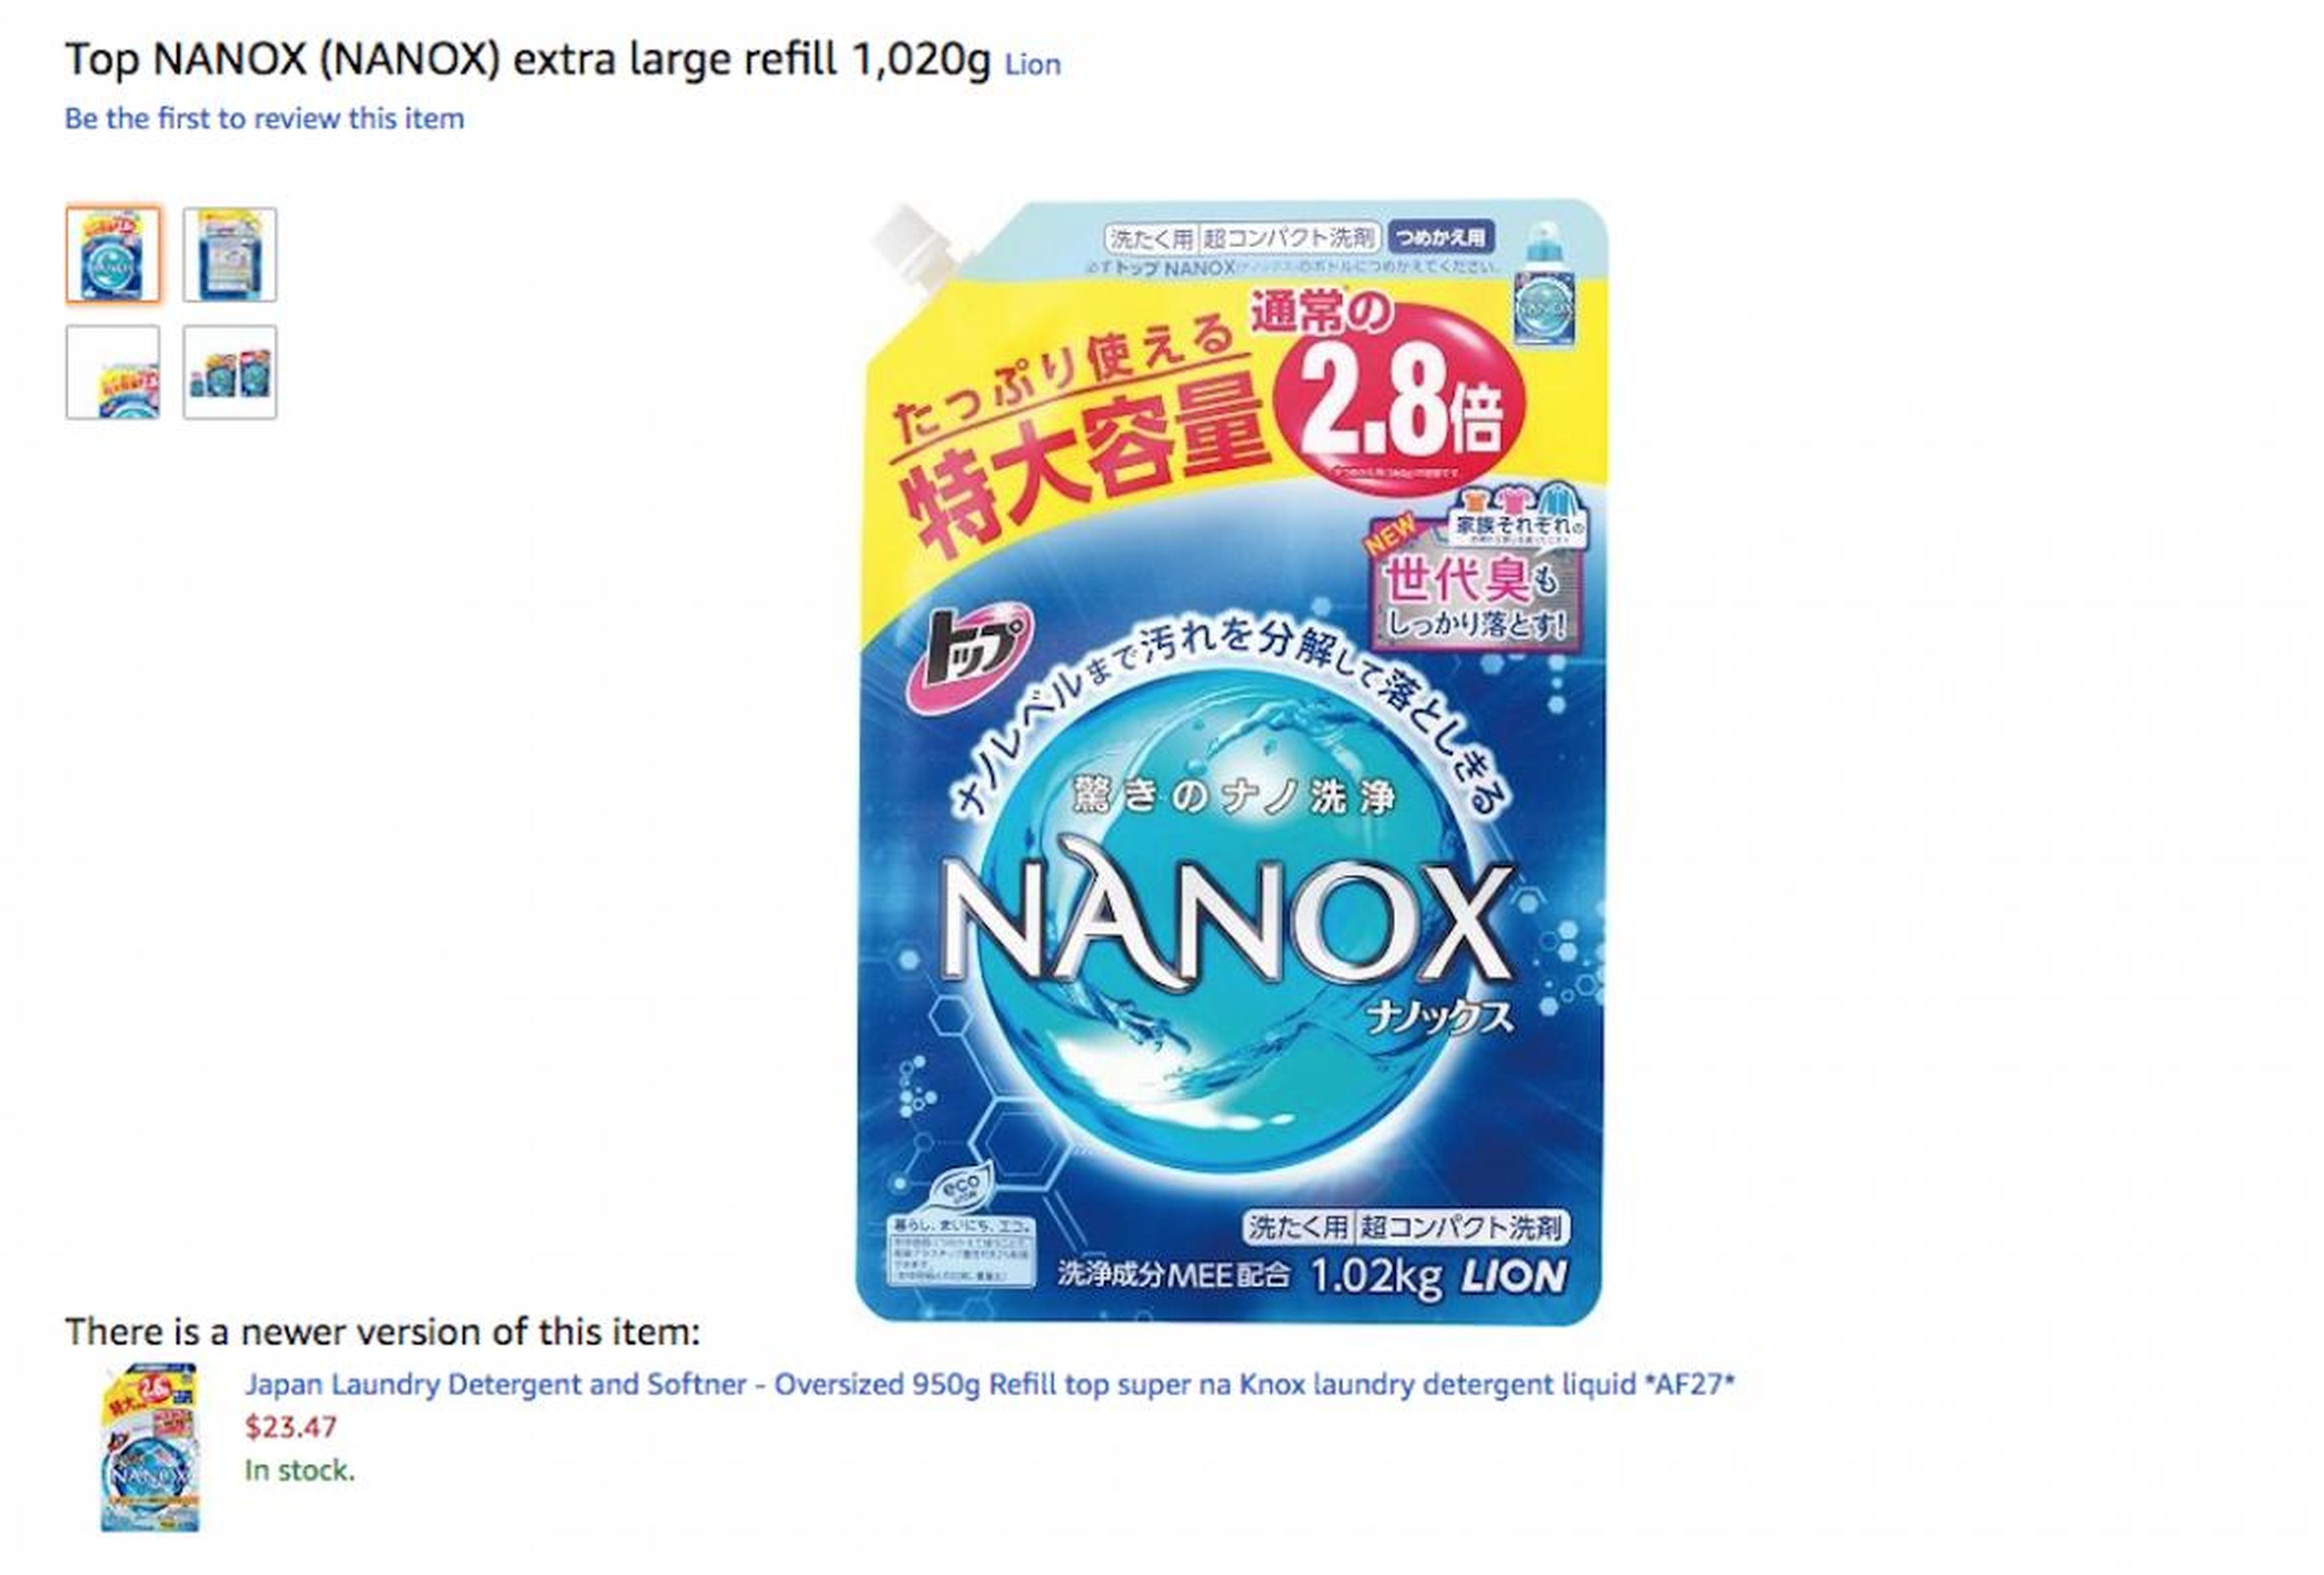 Japan: Laundry detergent was also popular in Japan, with shoppers buying <a href="https://amzn.to/2Jzesd8">Top Super Nanox Liquid Laundry Detergent</a> with an extra-large refill.